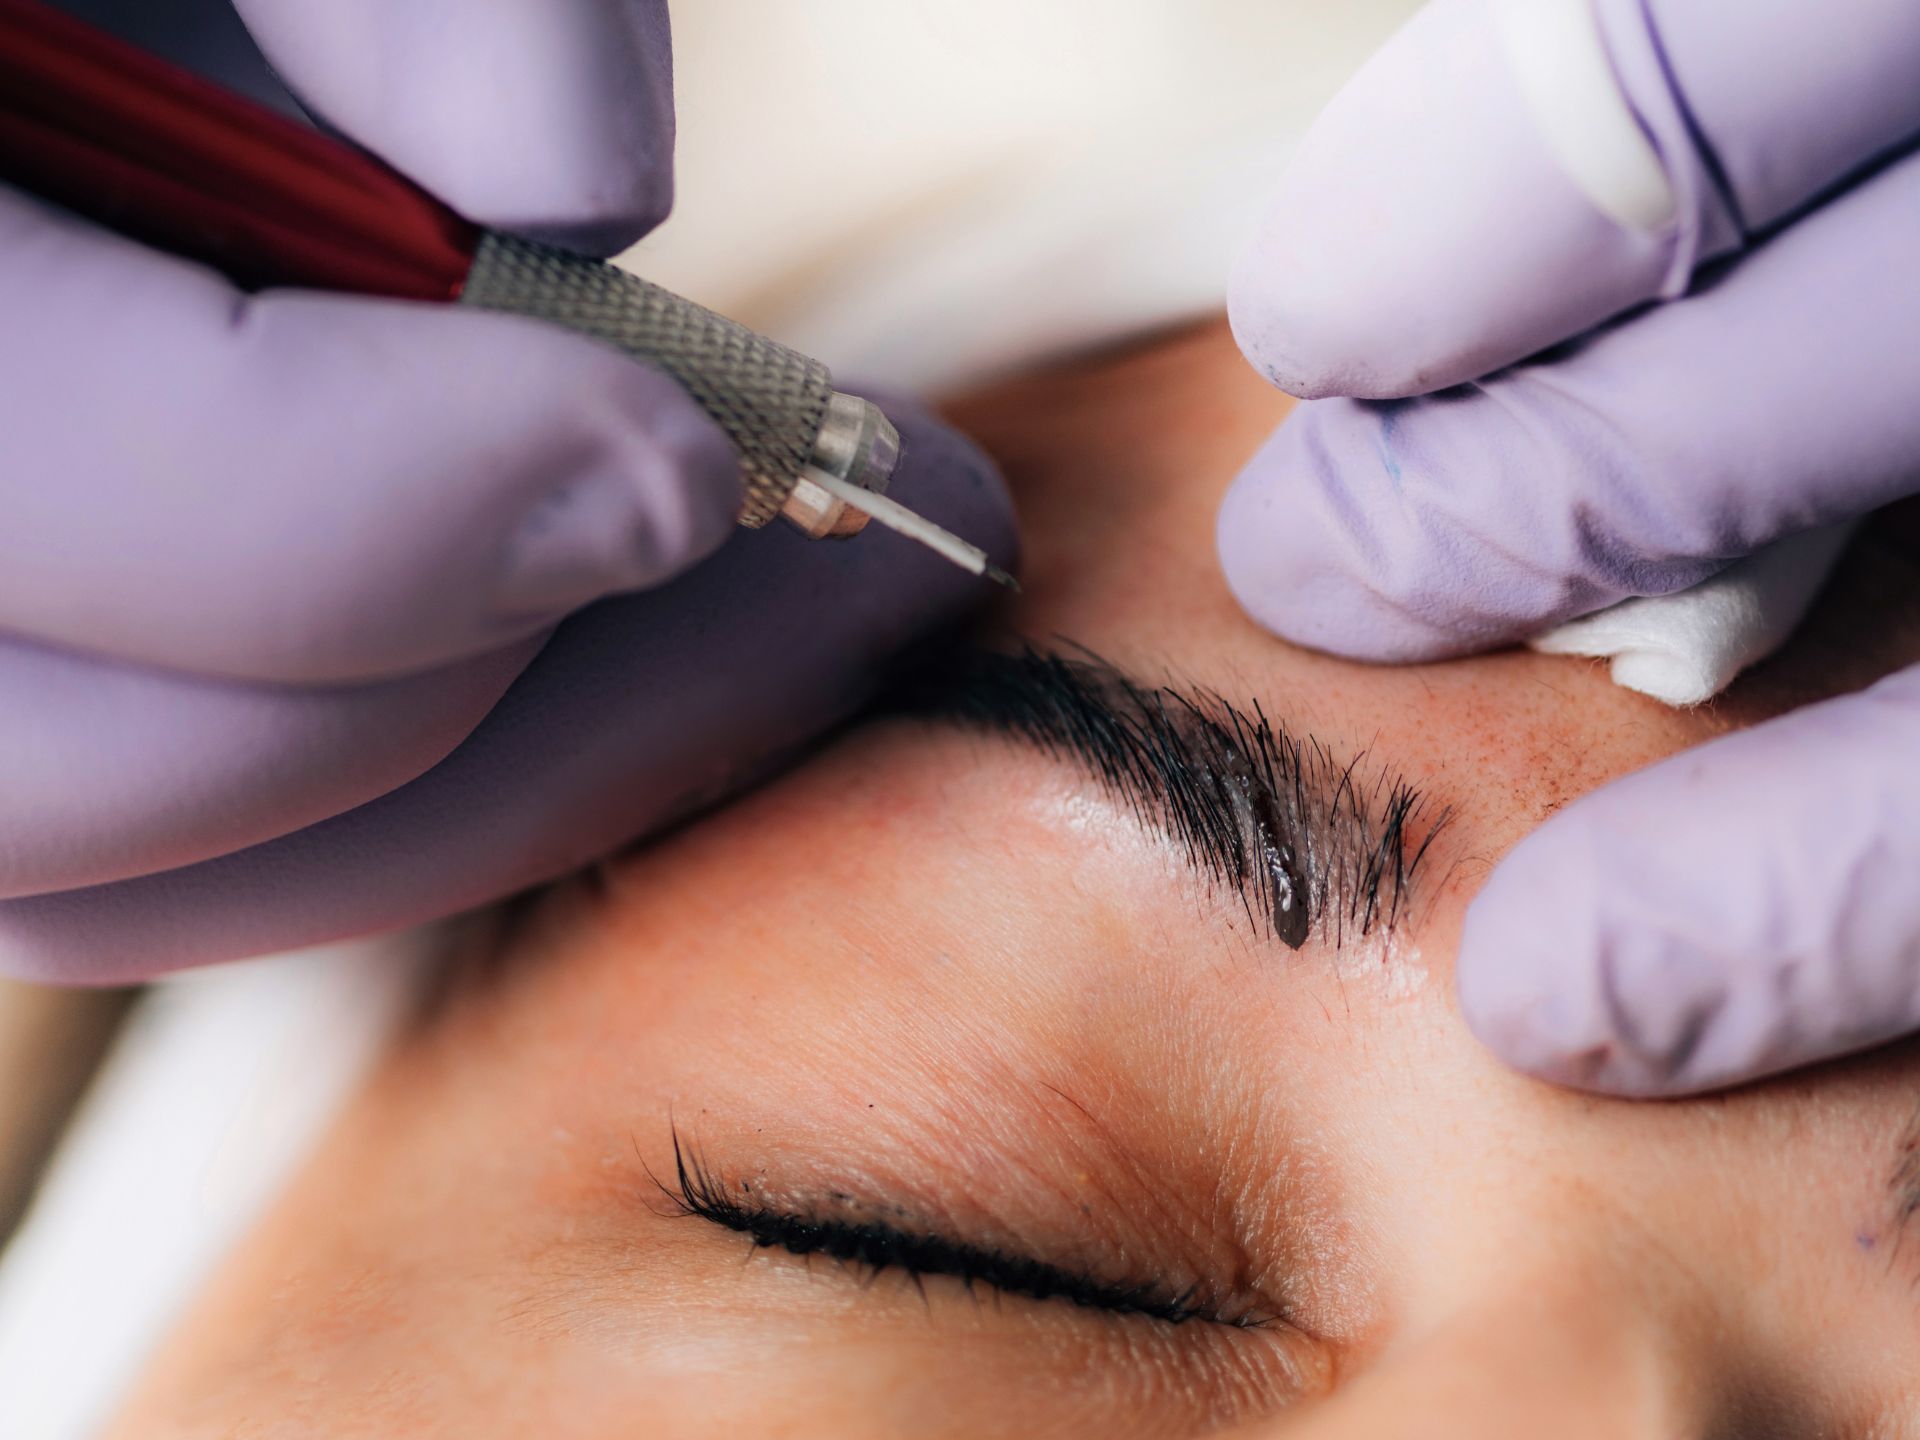 Permanent Makeup Artist creating hair-like strokes using Microblading Needle and Pigment.